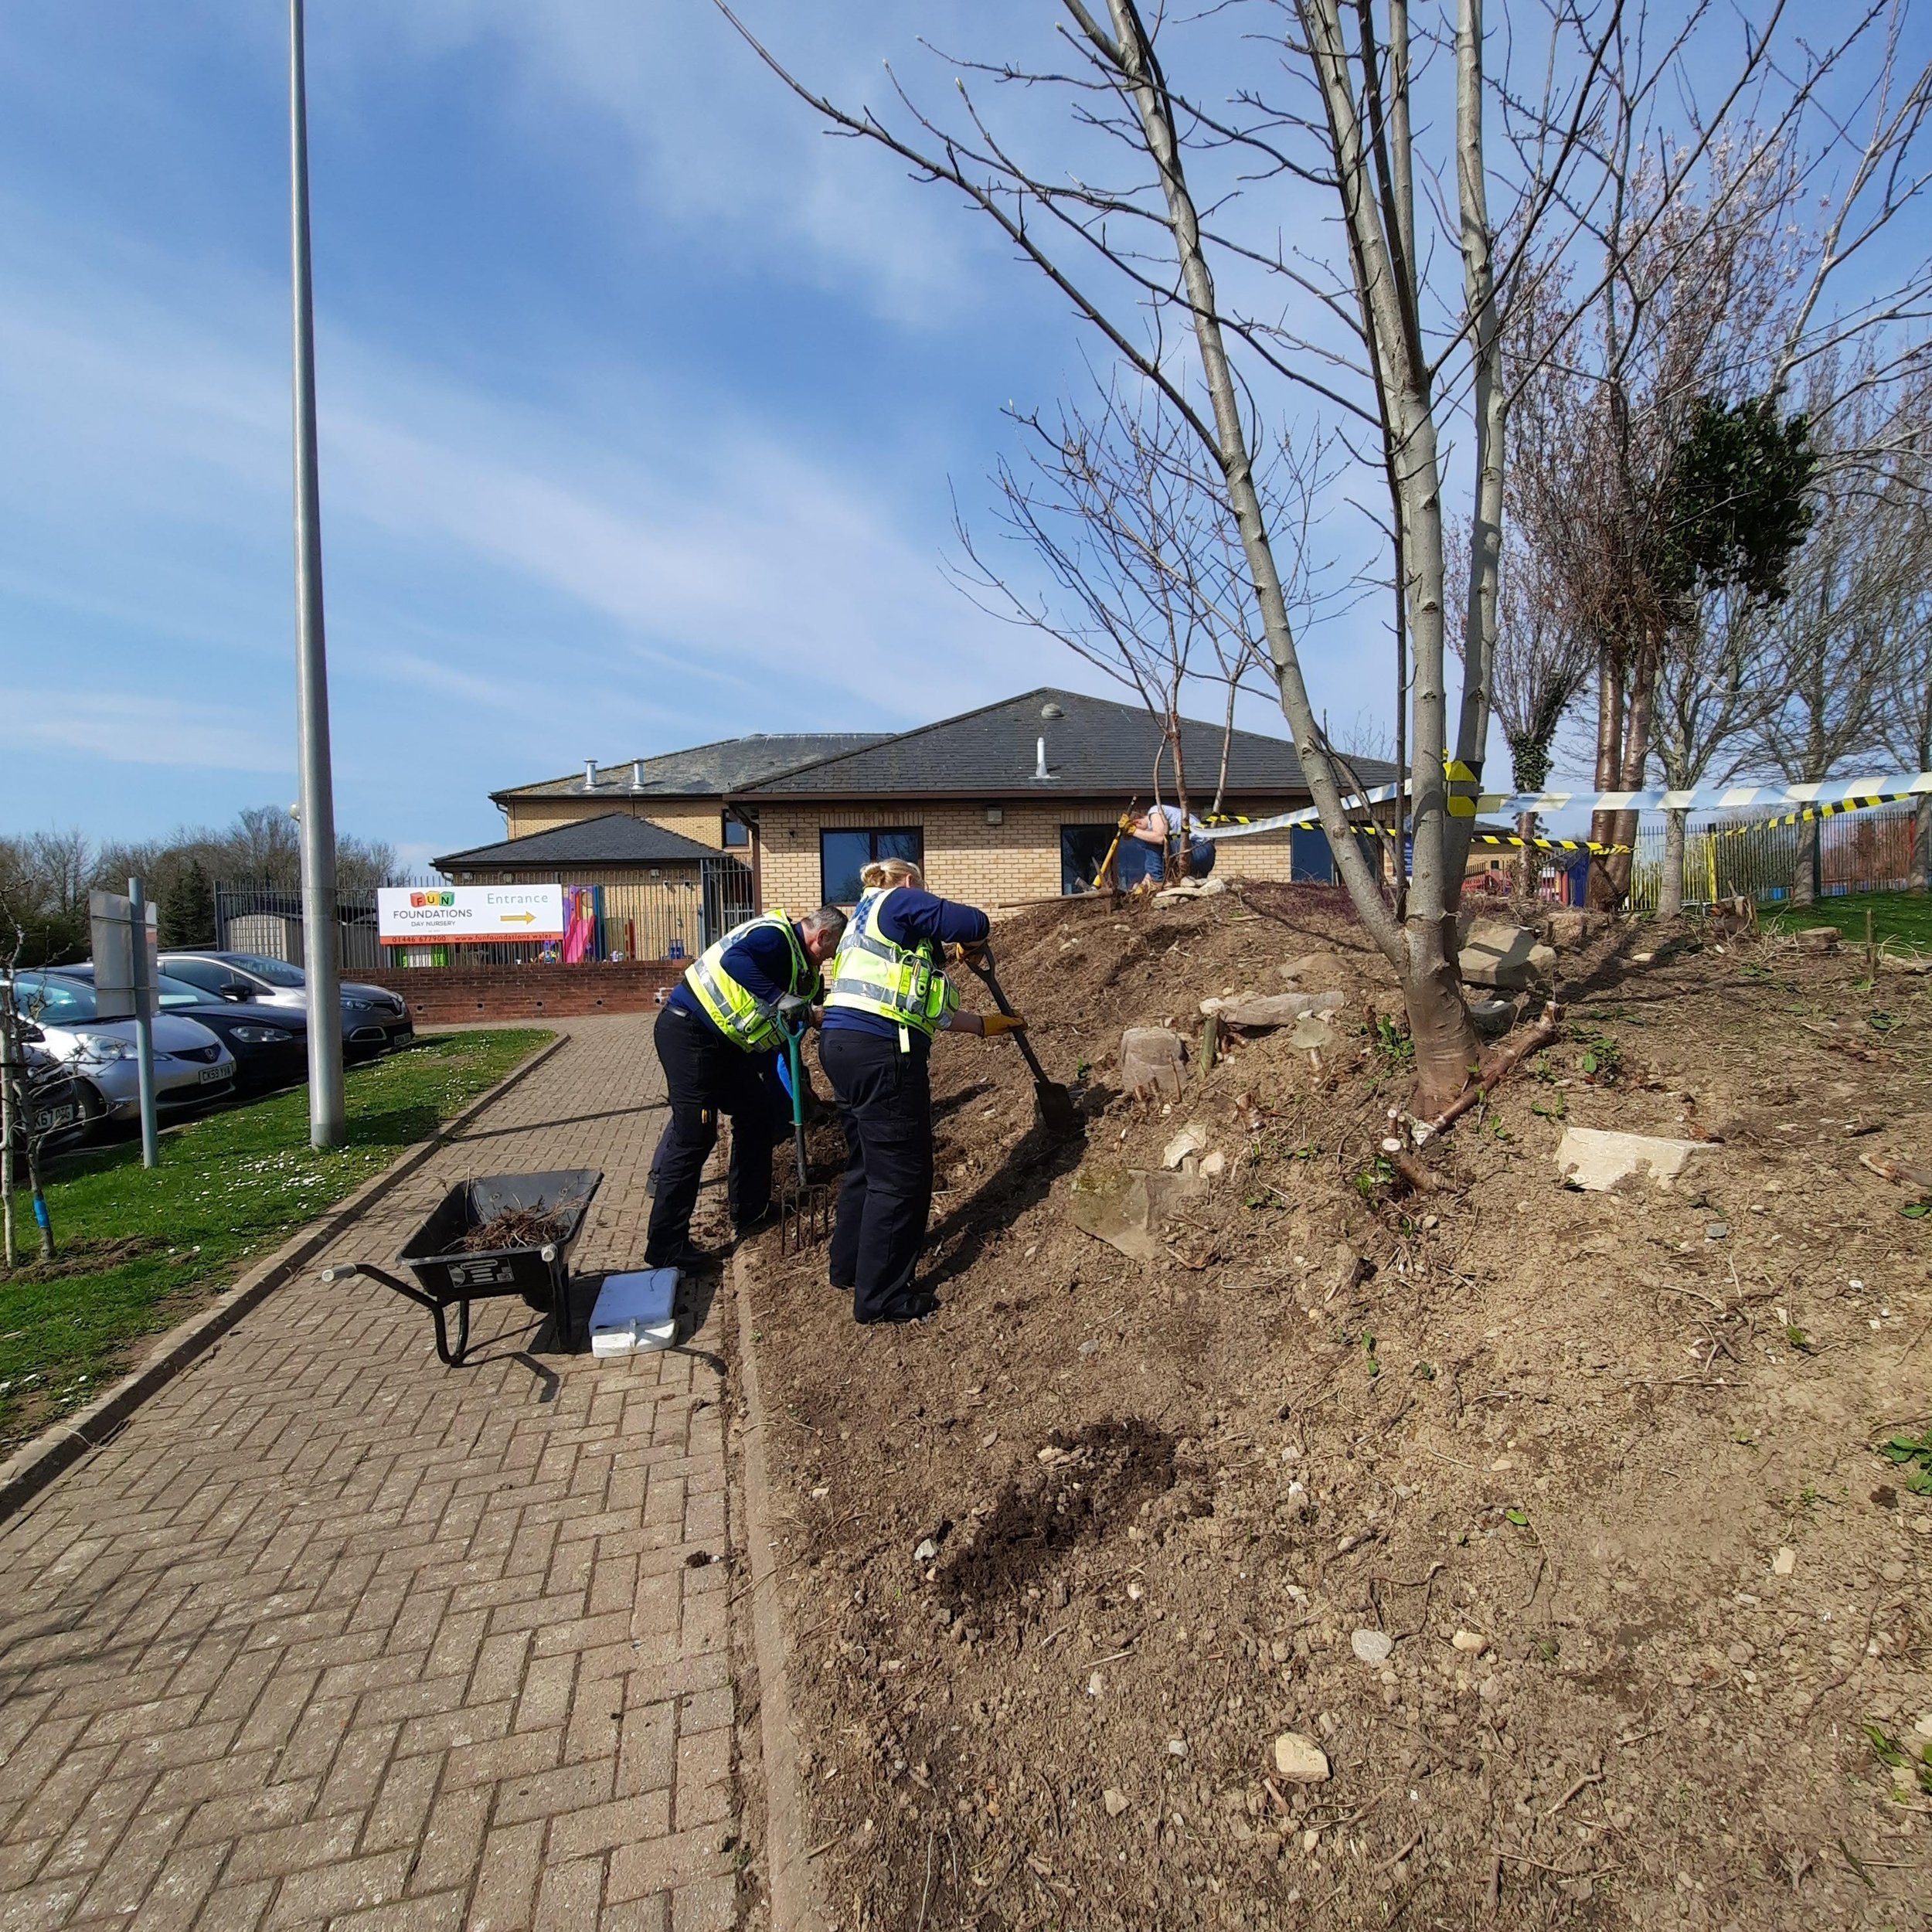 The local PCSO's volunteered too